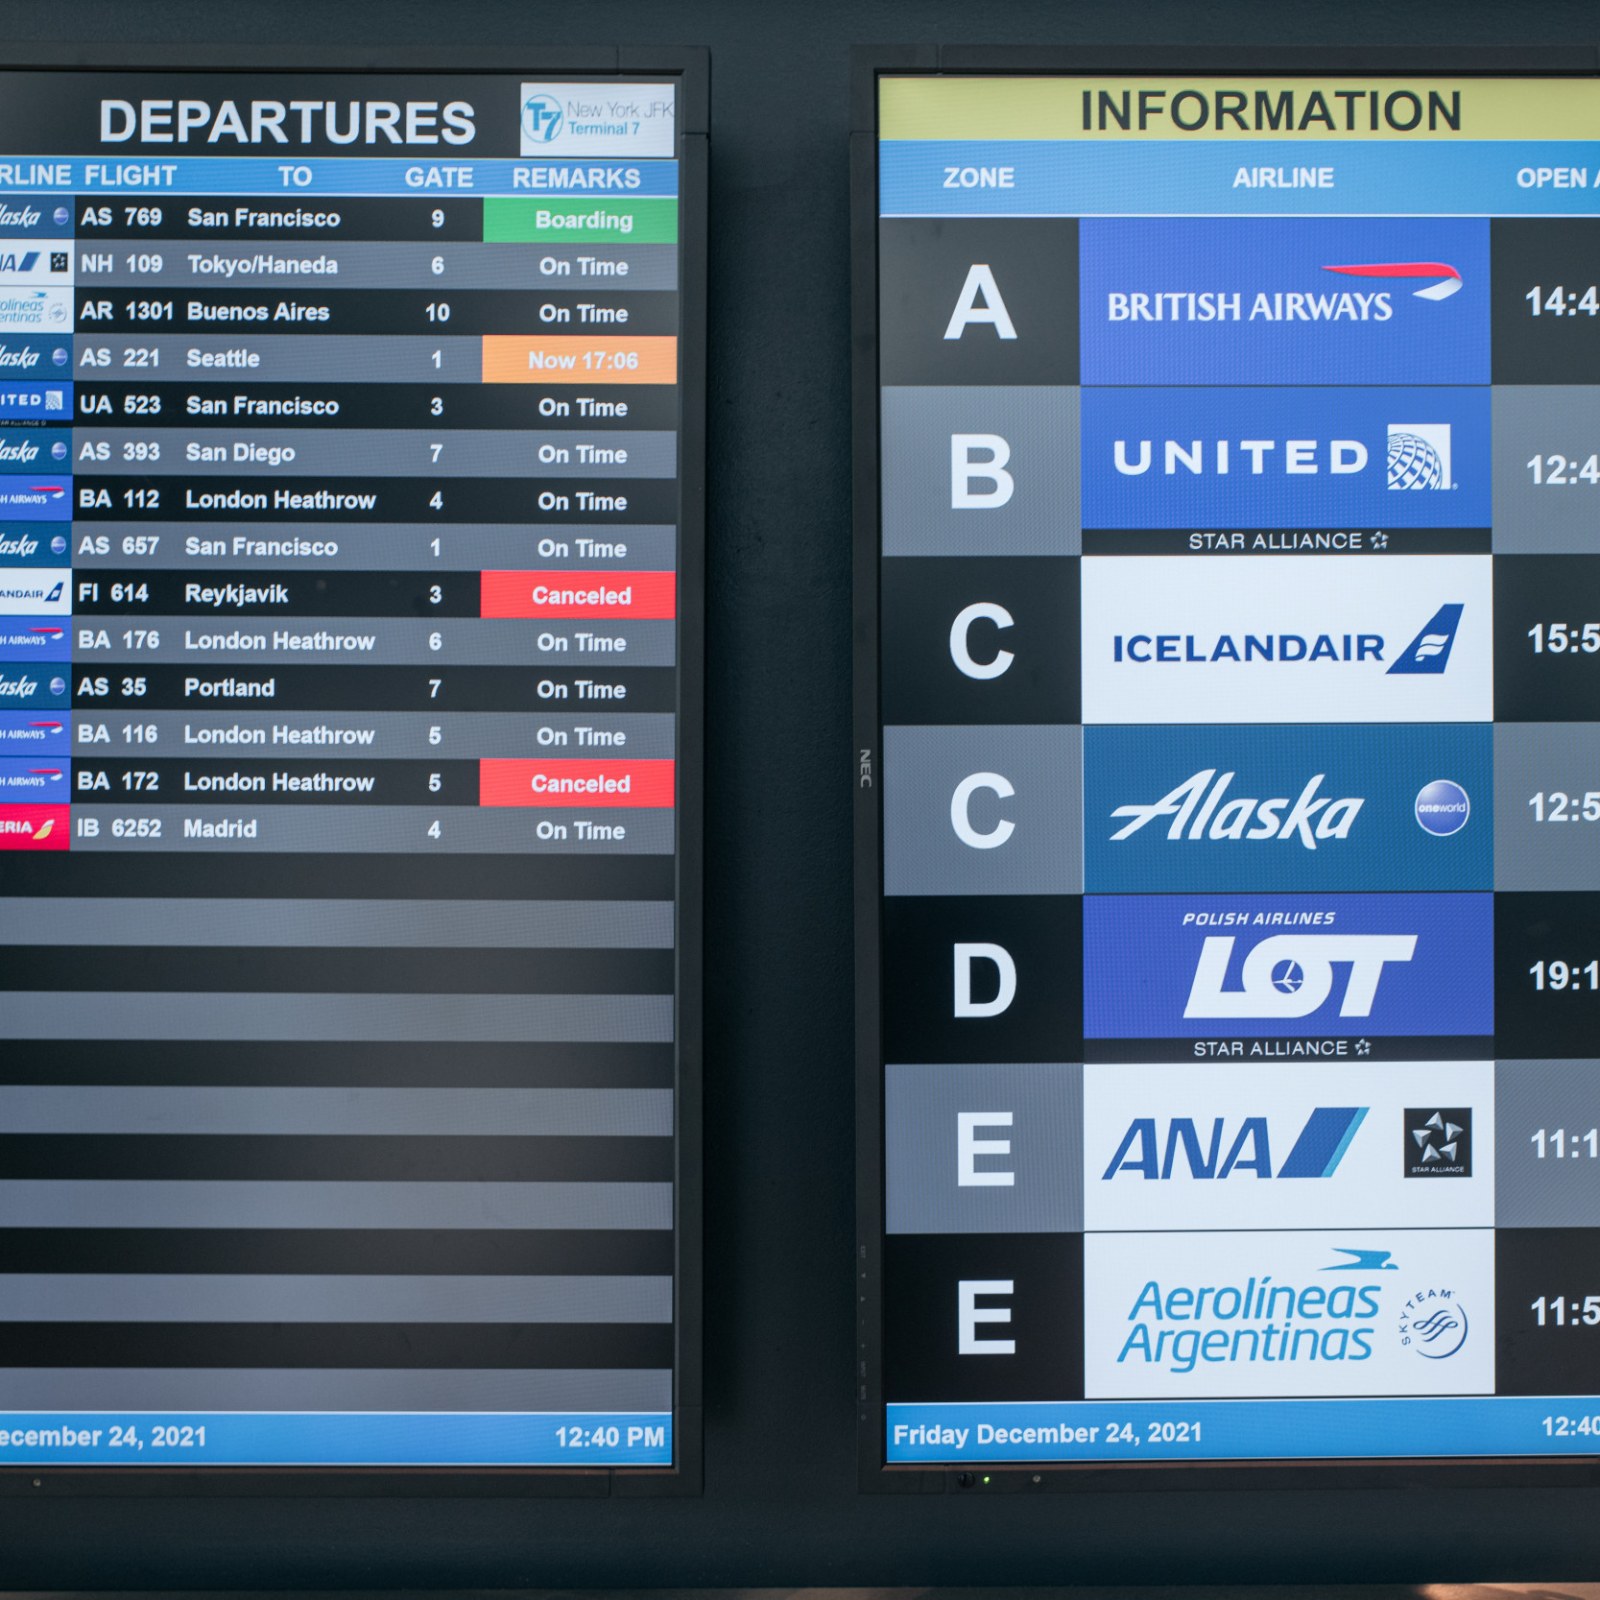 What to Do if Your Flight Was Canceled, Delayed Due to Airlines' Omicron Staff Shortages